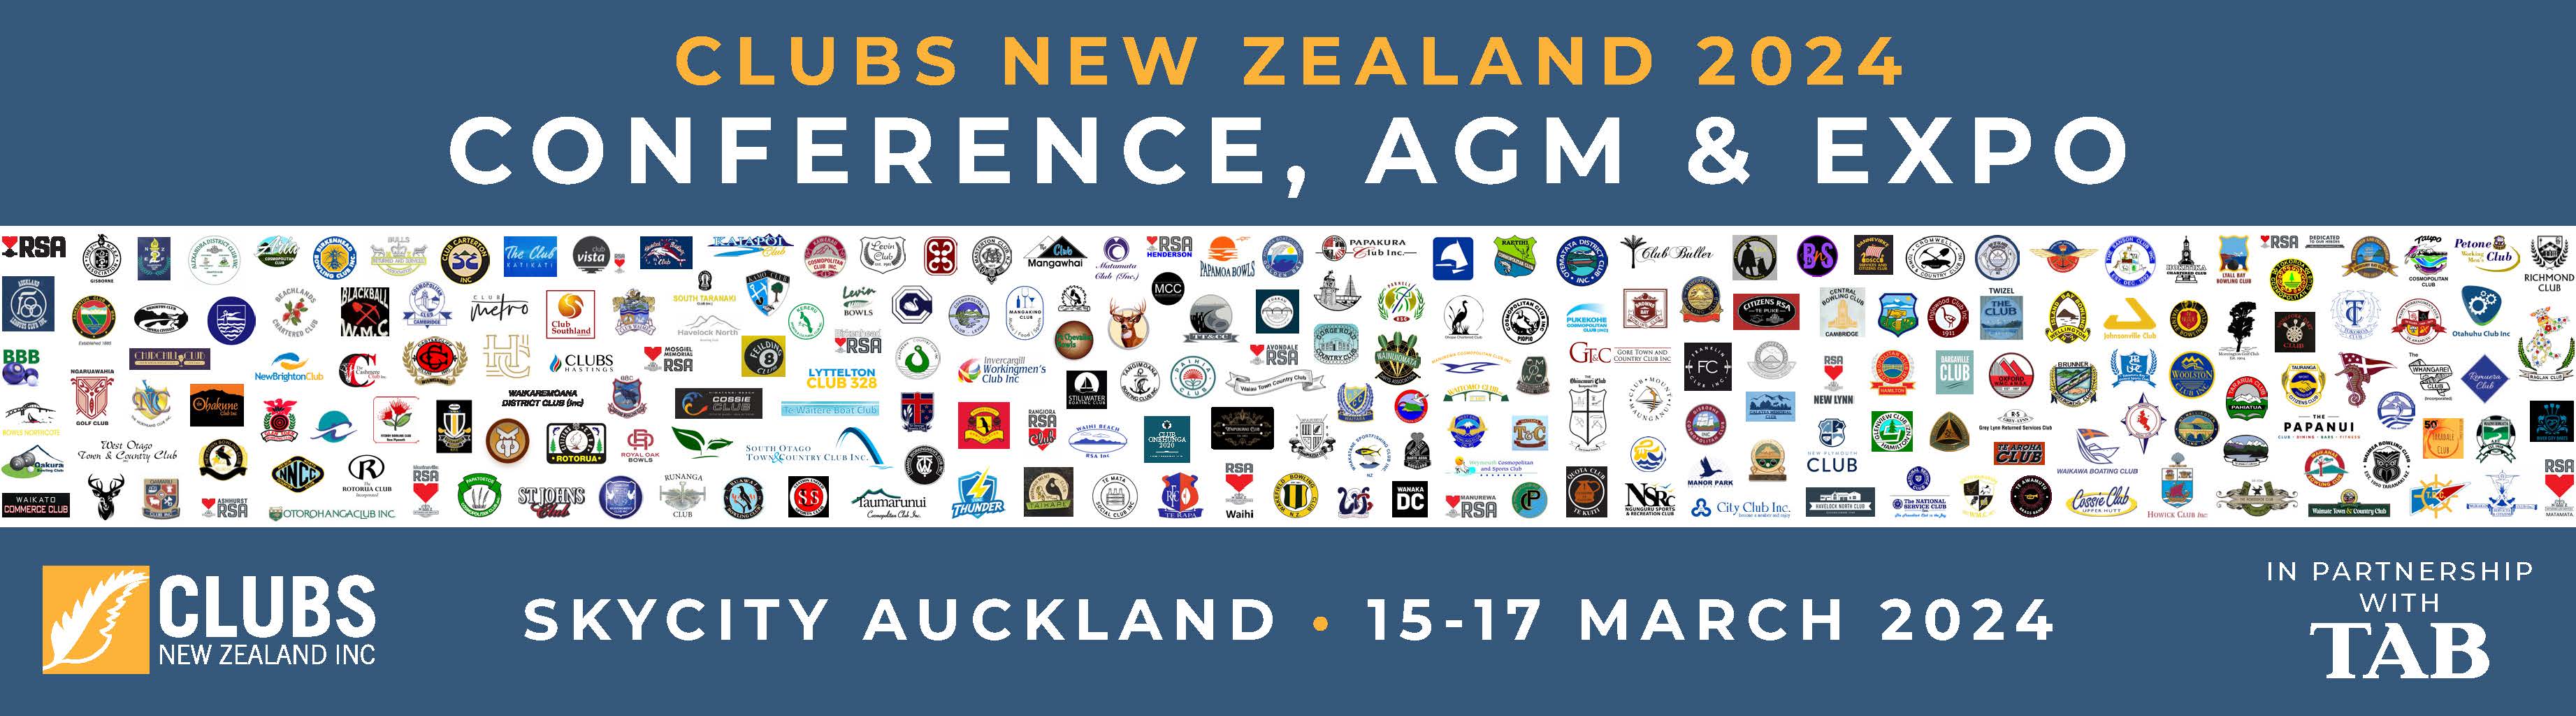 Clubs New Zealand 2024 Conference, AGM and Expo Clubs New Zealand